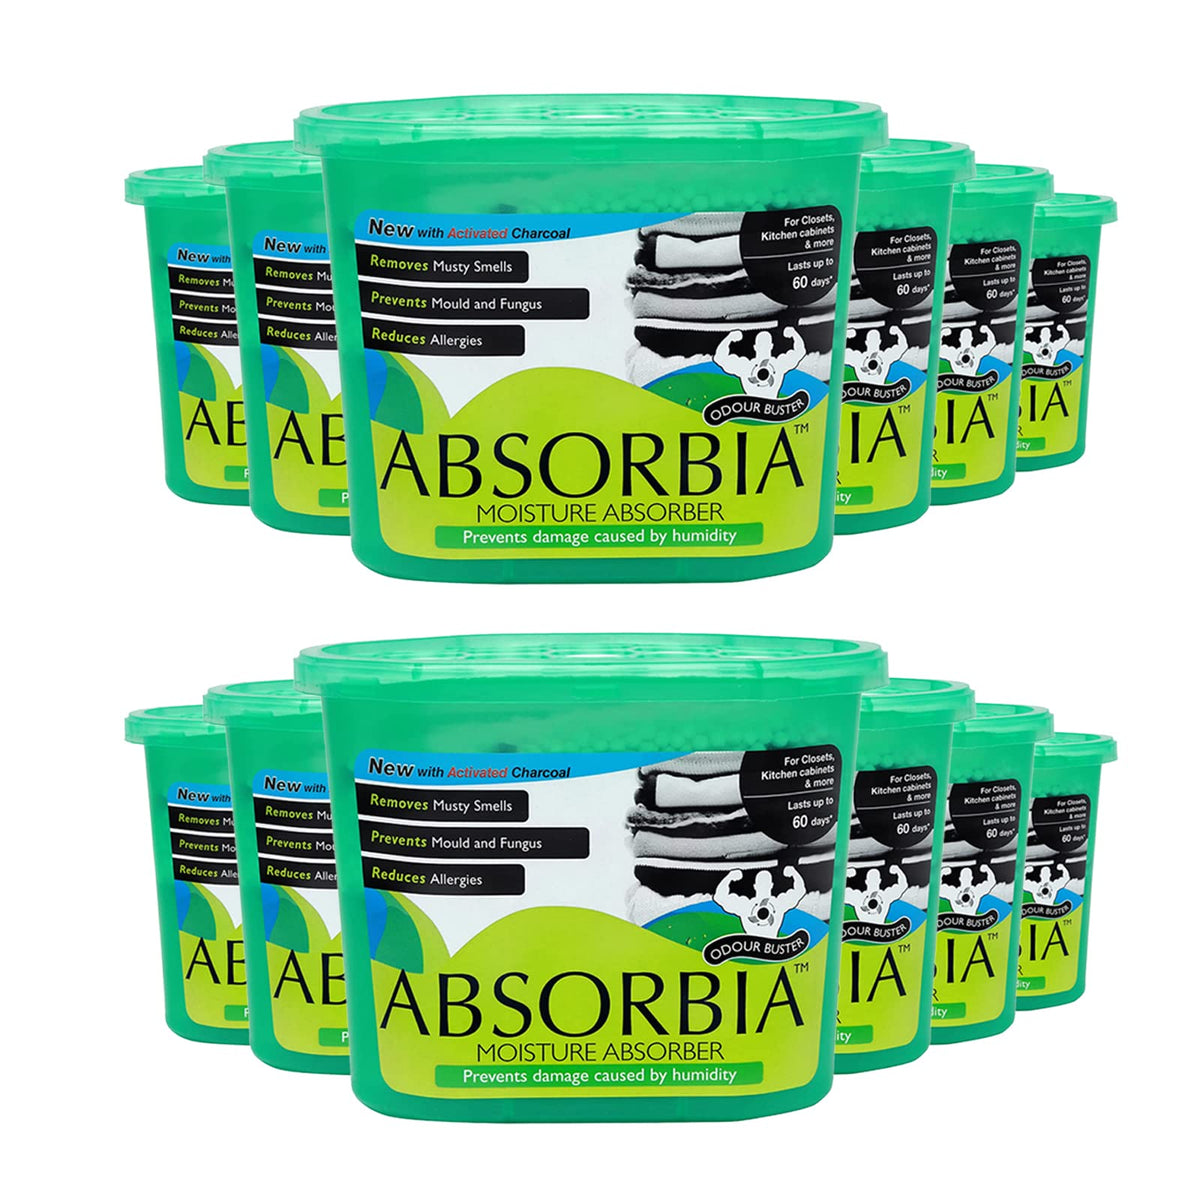 Absorbia Moisture Absorber & Odour Buster with Activated Charcoal | Season XL - Pack of 12 (300 gms X 12 Boxes) | Absorption Capacity 600ml Each | Dehumidier for Wardrobe, Cupboards & Closets | Fights Against Mould, Fungus & Musty smells